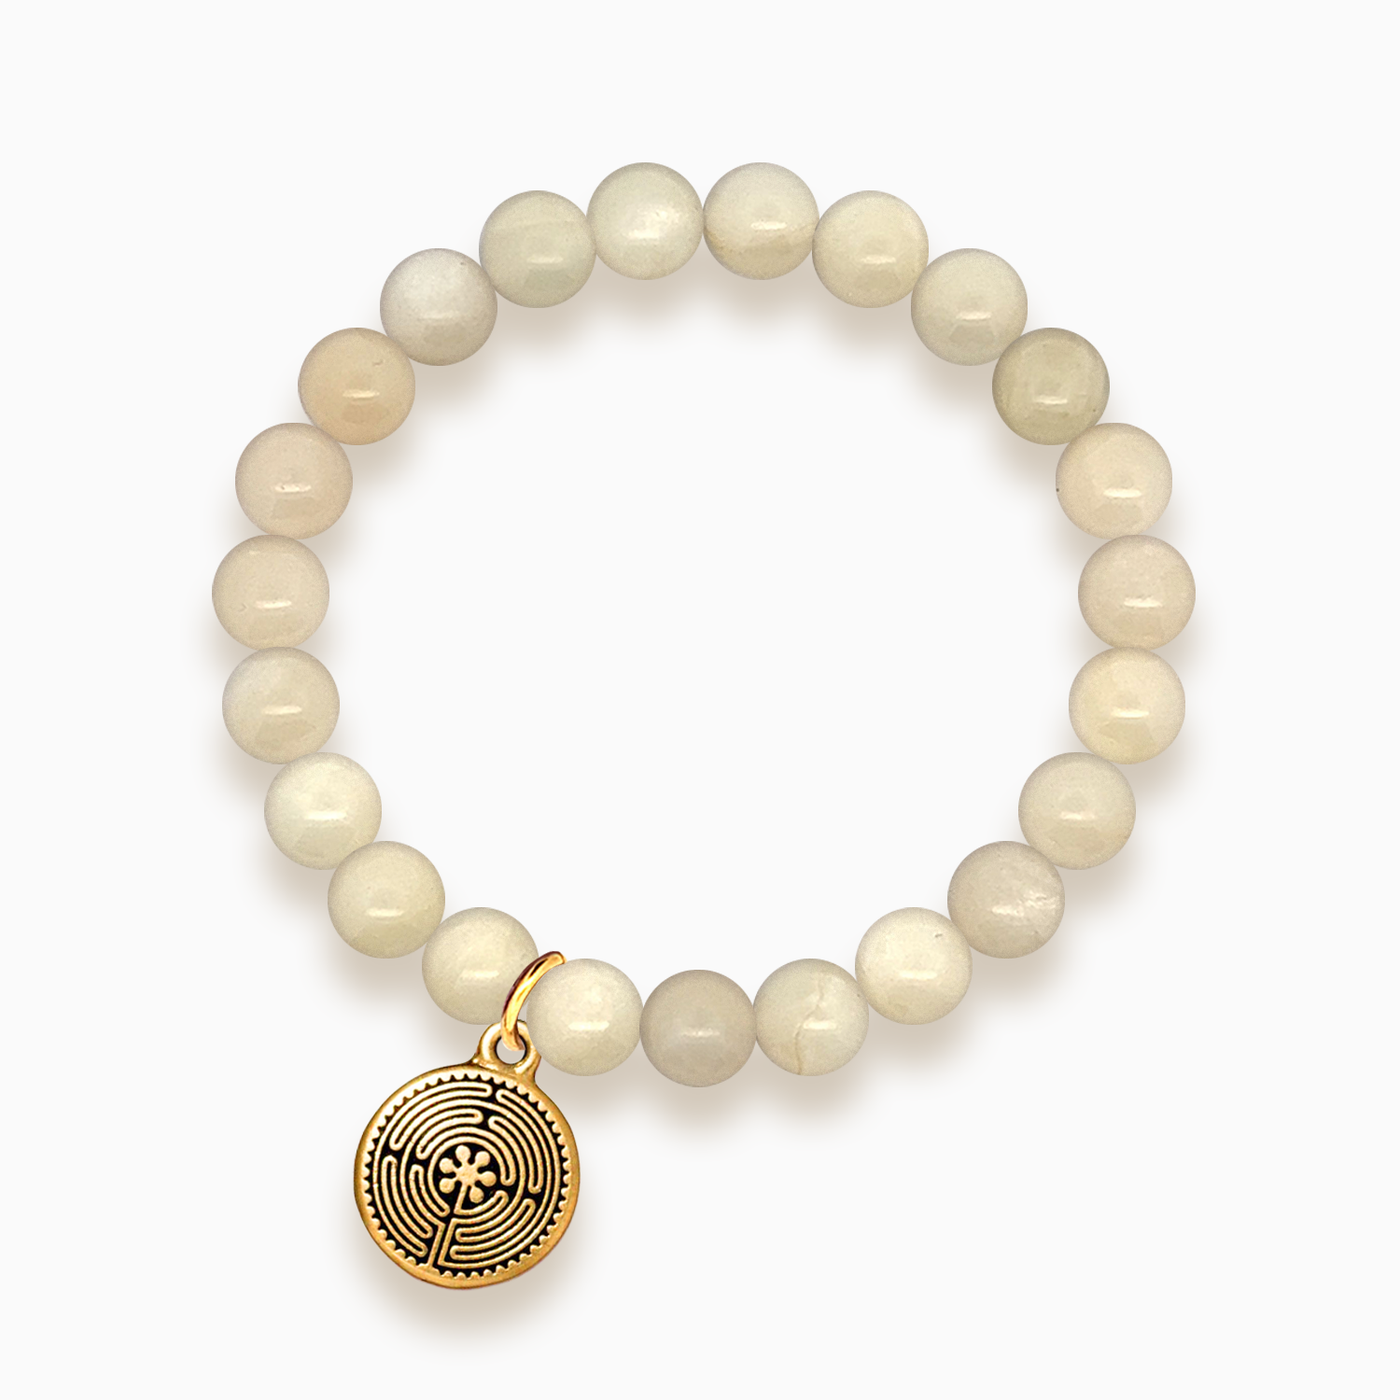 Gemstone Stacker Bracelet With Gold Plated Labyrinth Charm